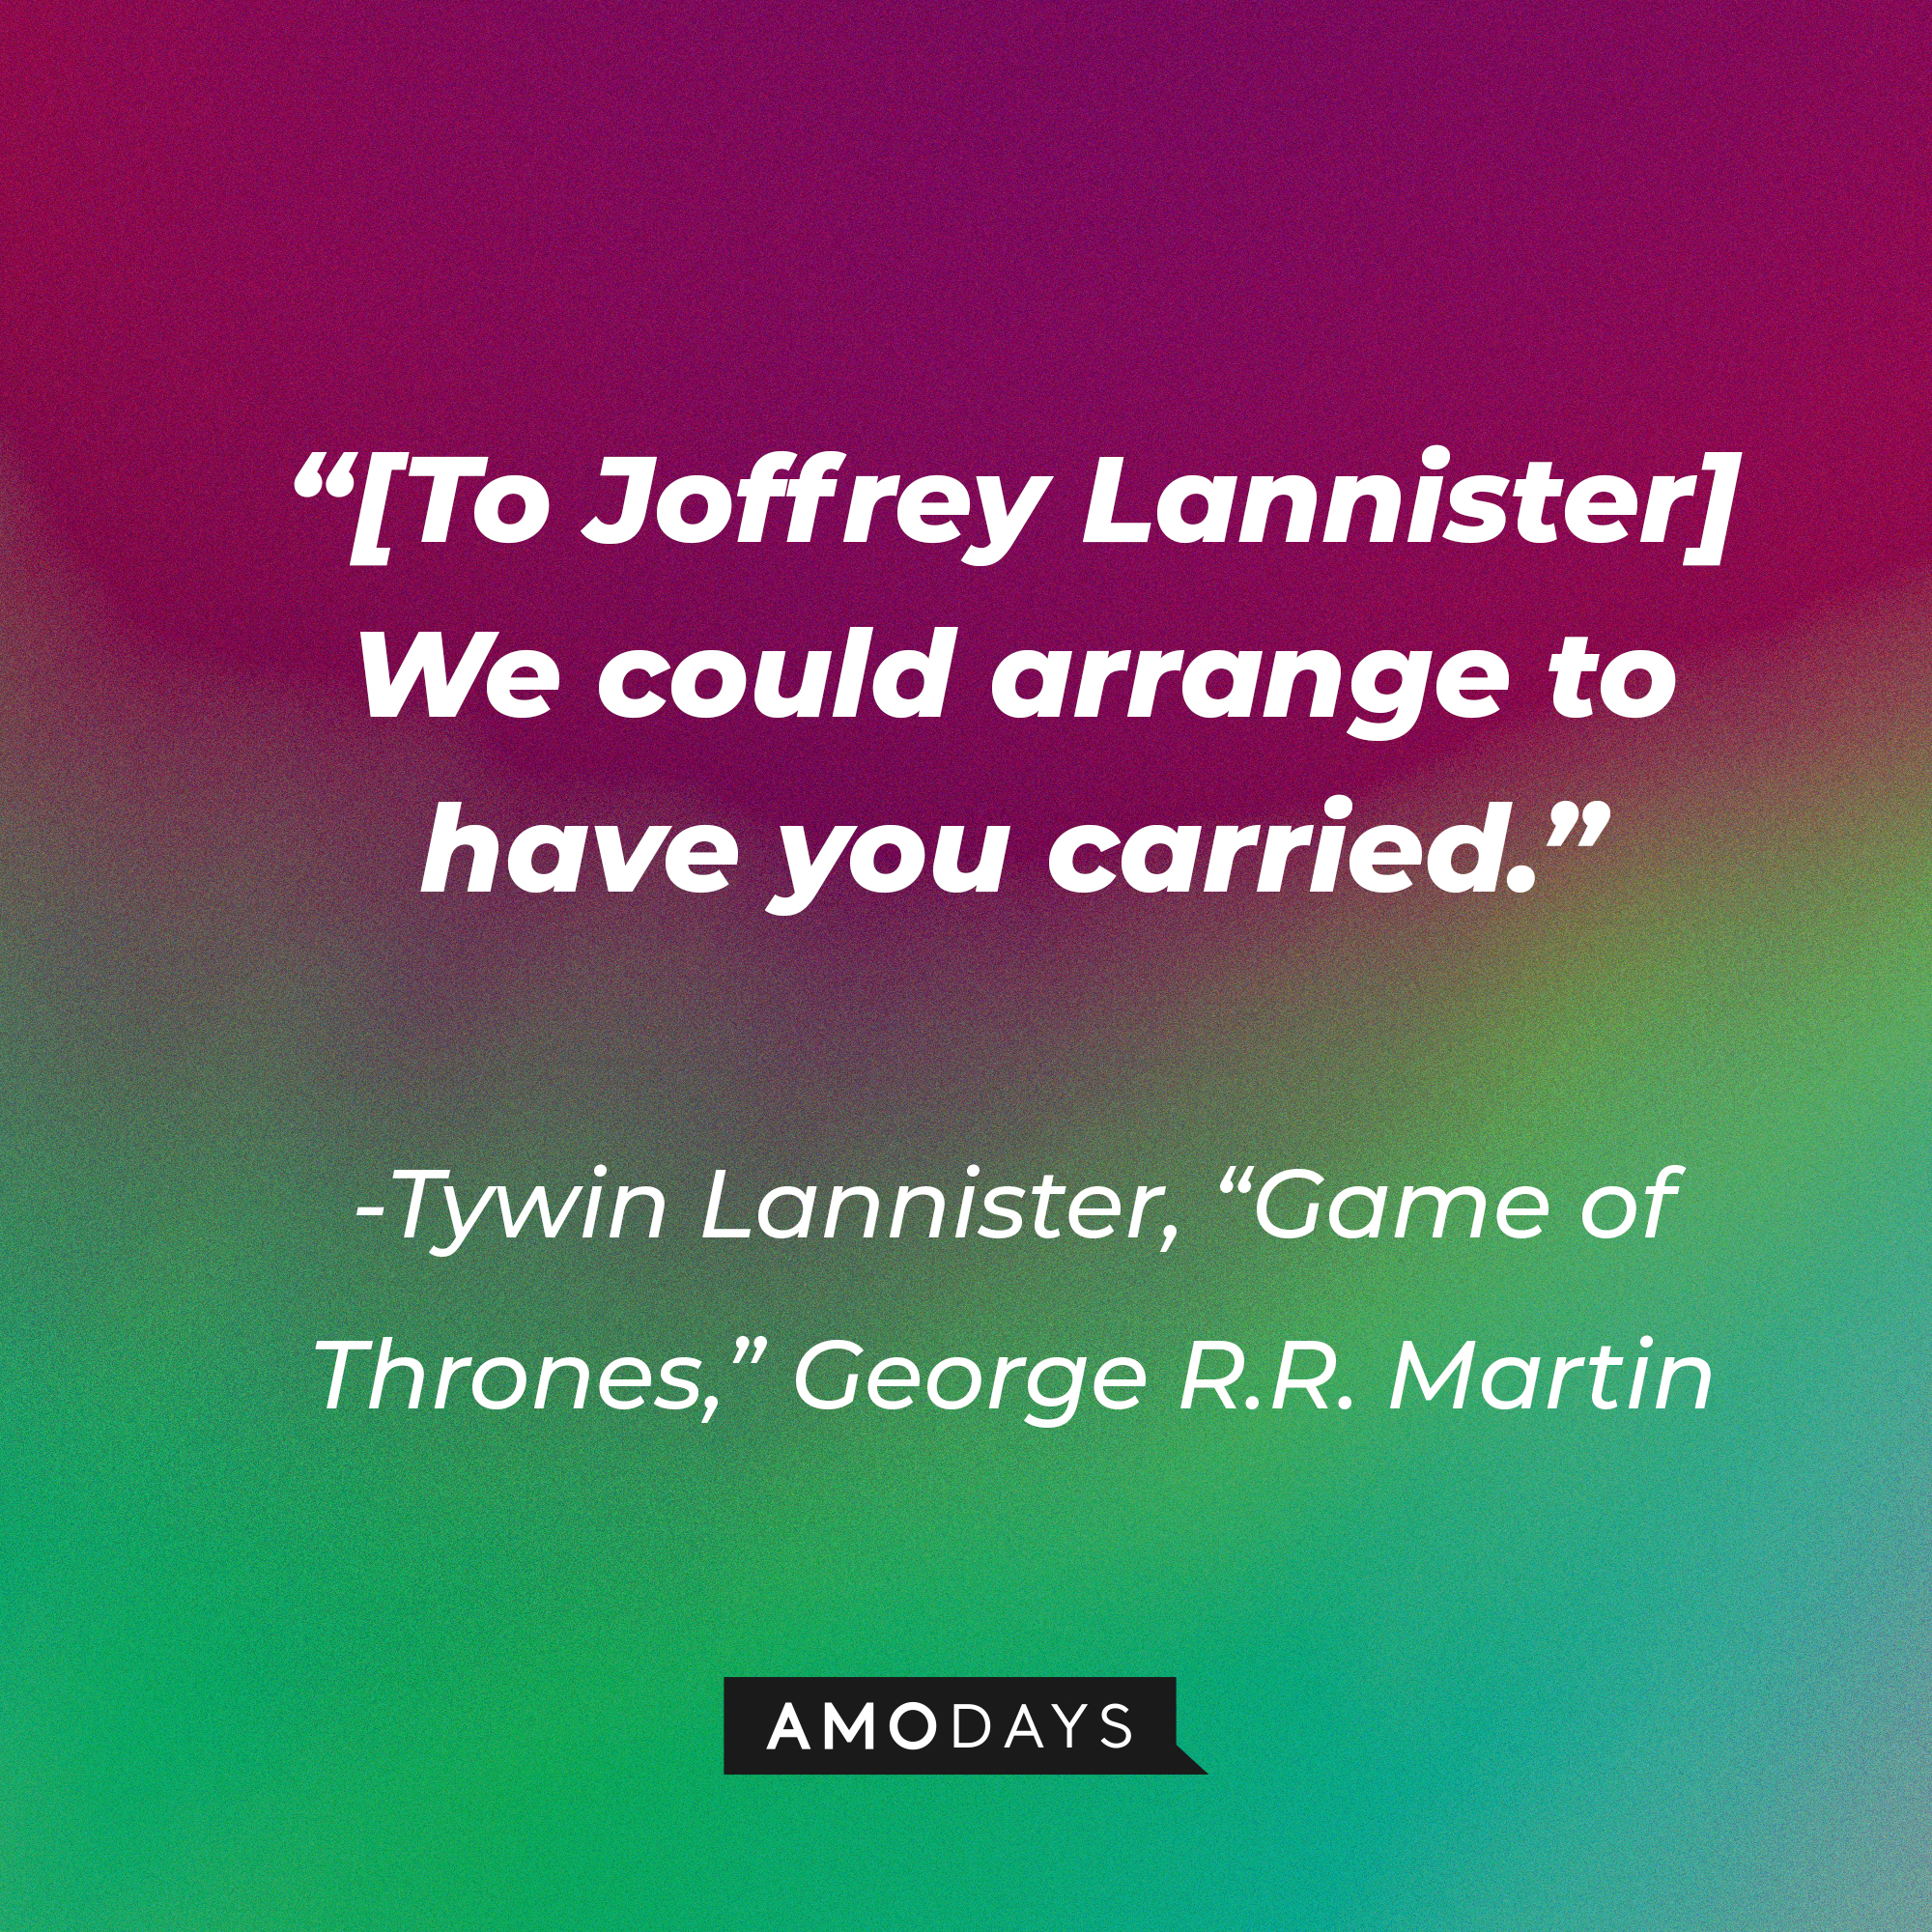 Tywin Lannister’s quote from George R.R. Martin's "Game of Thrones": “[To Joffrey Lannister] We could arrange to have you carried.” | Source: AmoDays